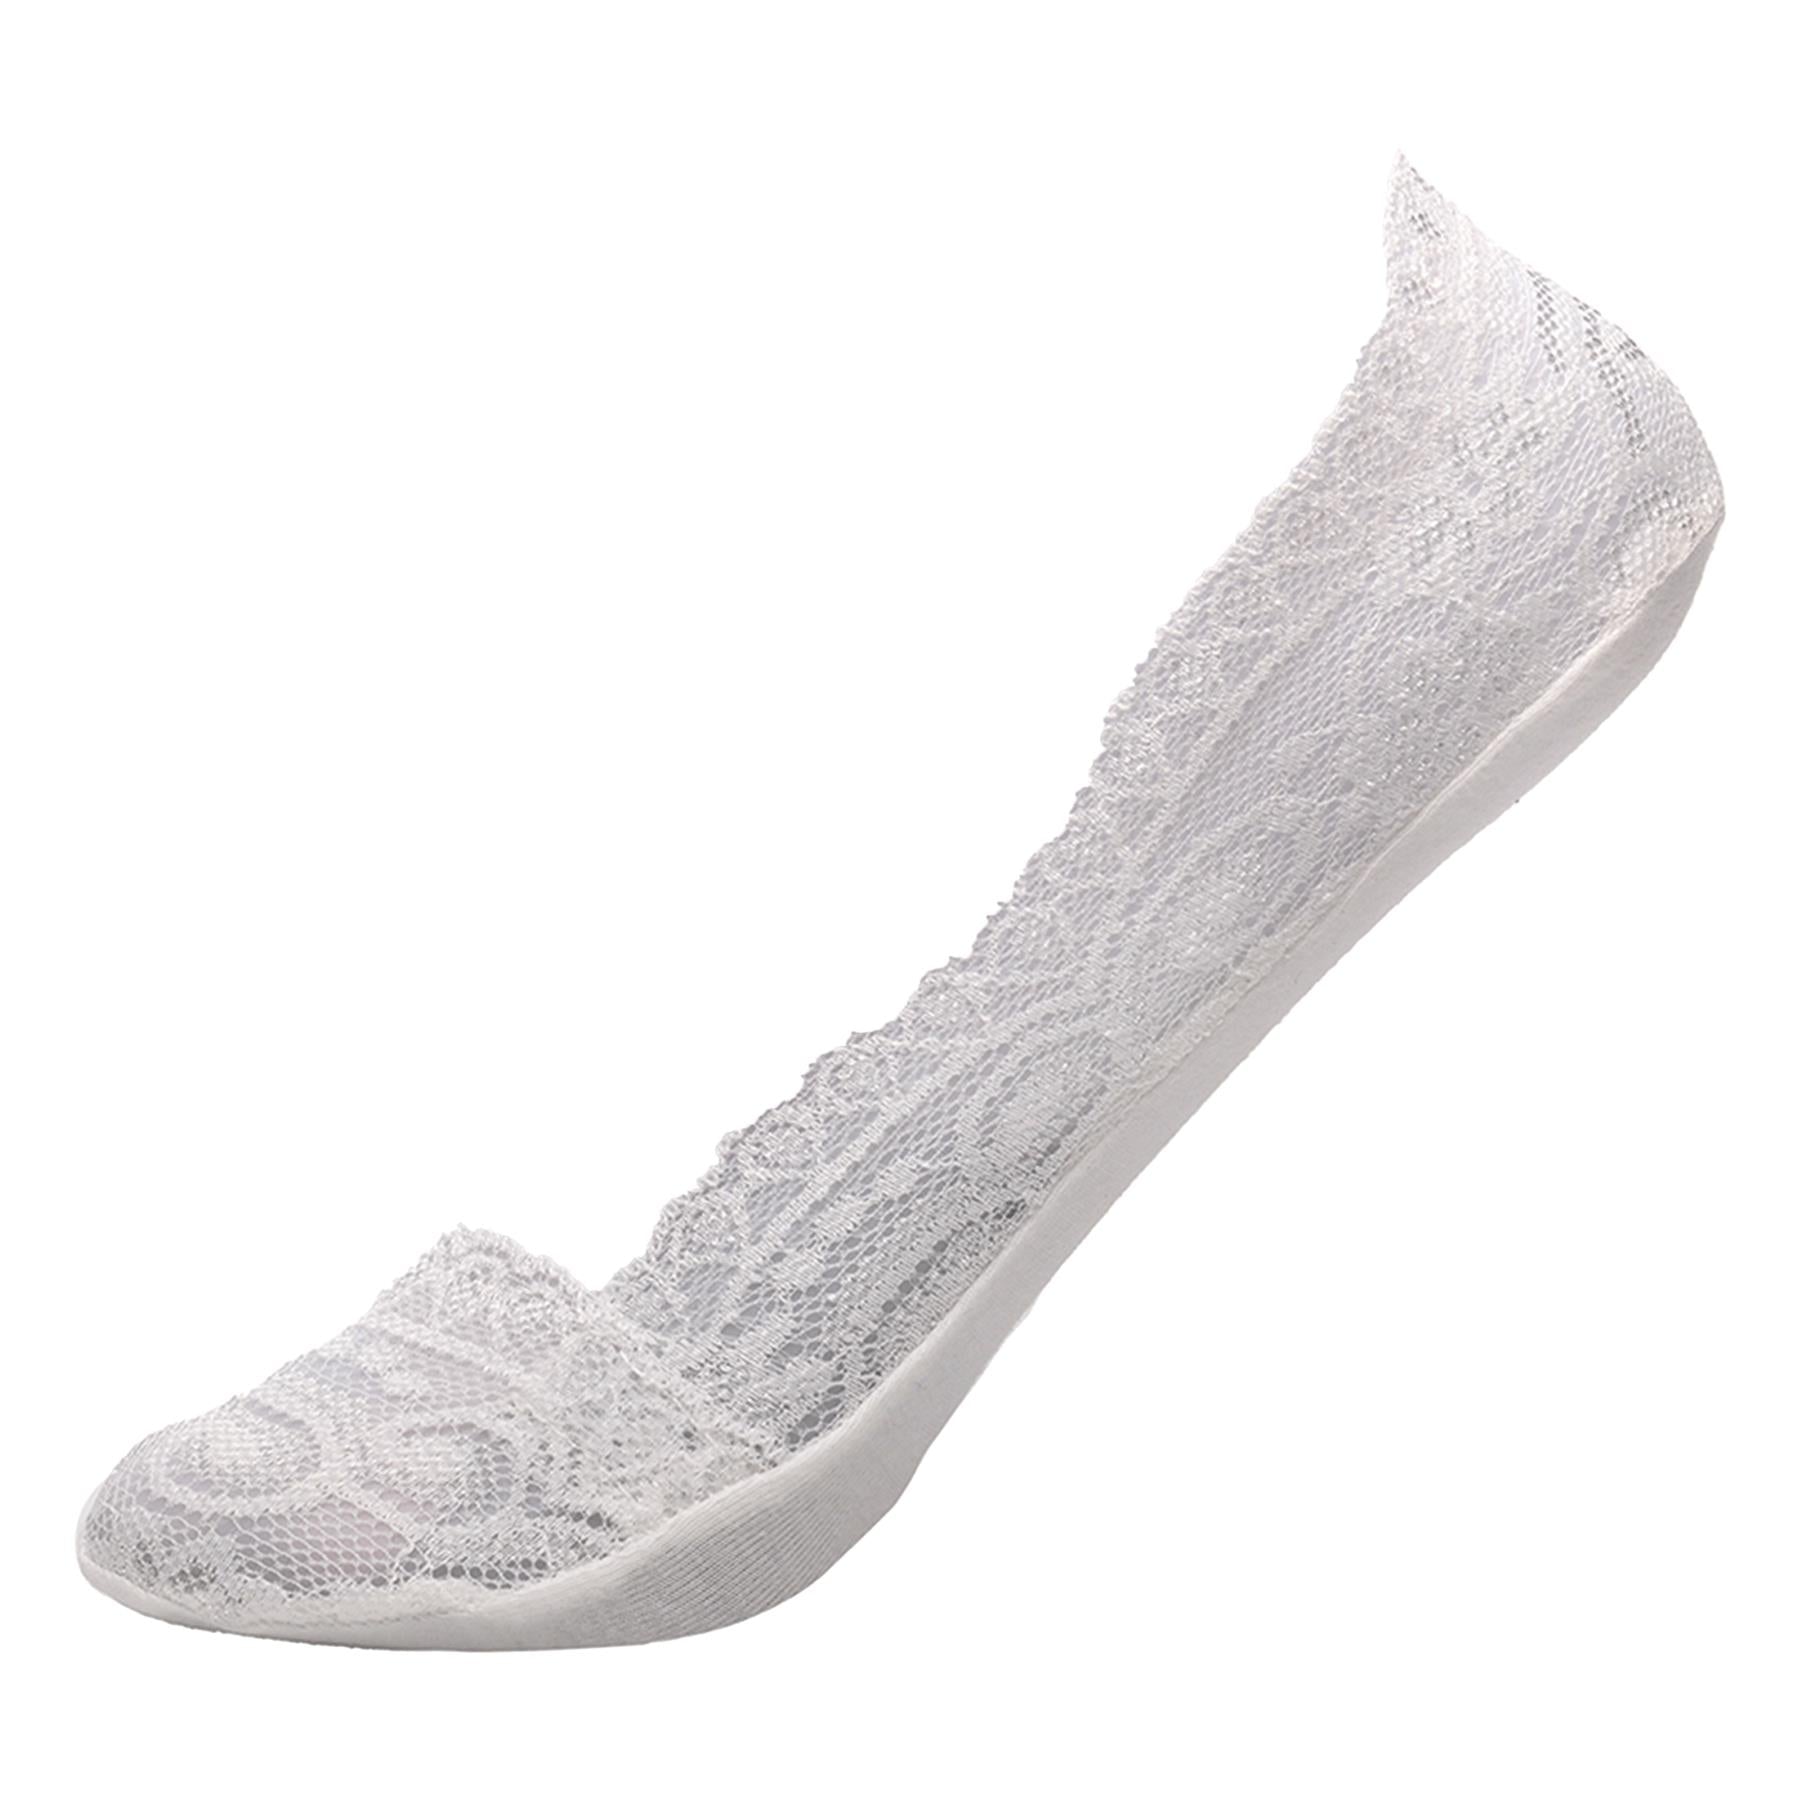 Ladies Anti Slip Skin Invisible Shoe Liners Low Cut Cotton Pack of 2 Lace Socks